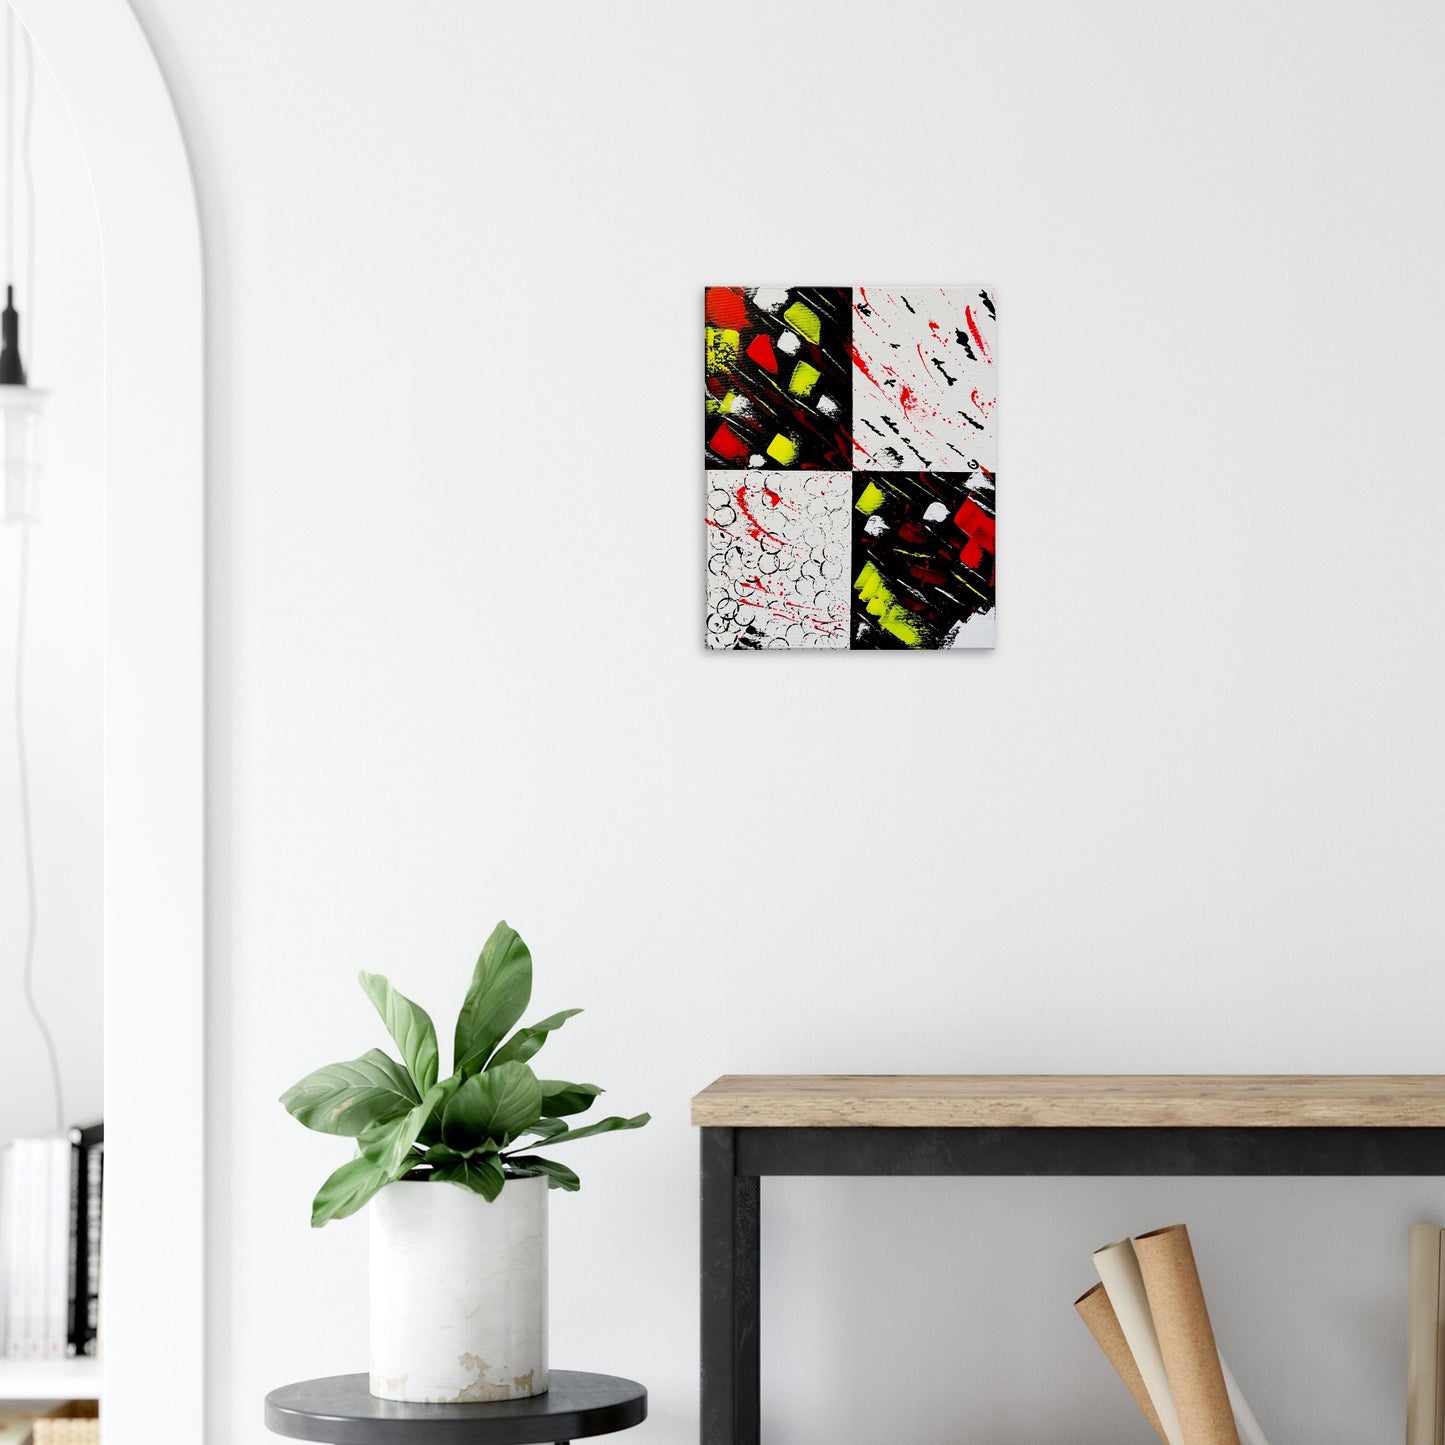 The 'Flight of Human Emotions' canvas print by Yana Virtuoso in full view within a living room, blending the artwork's vivid hues and emotional resonance with the room's decor, inviting contemplation and enhancing the space.